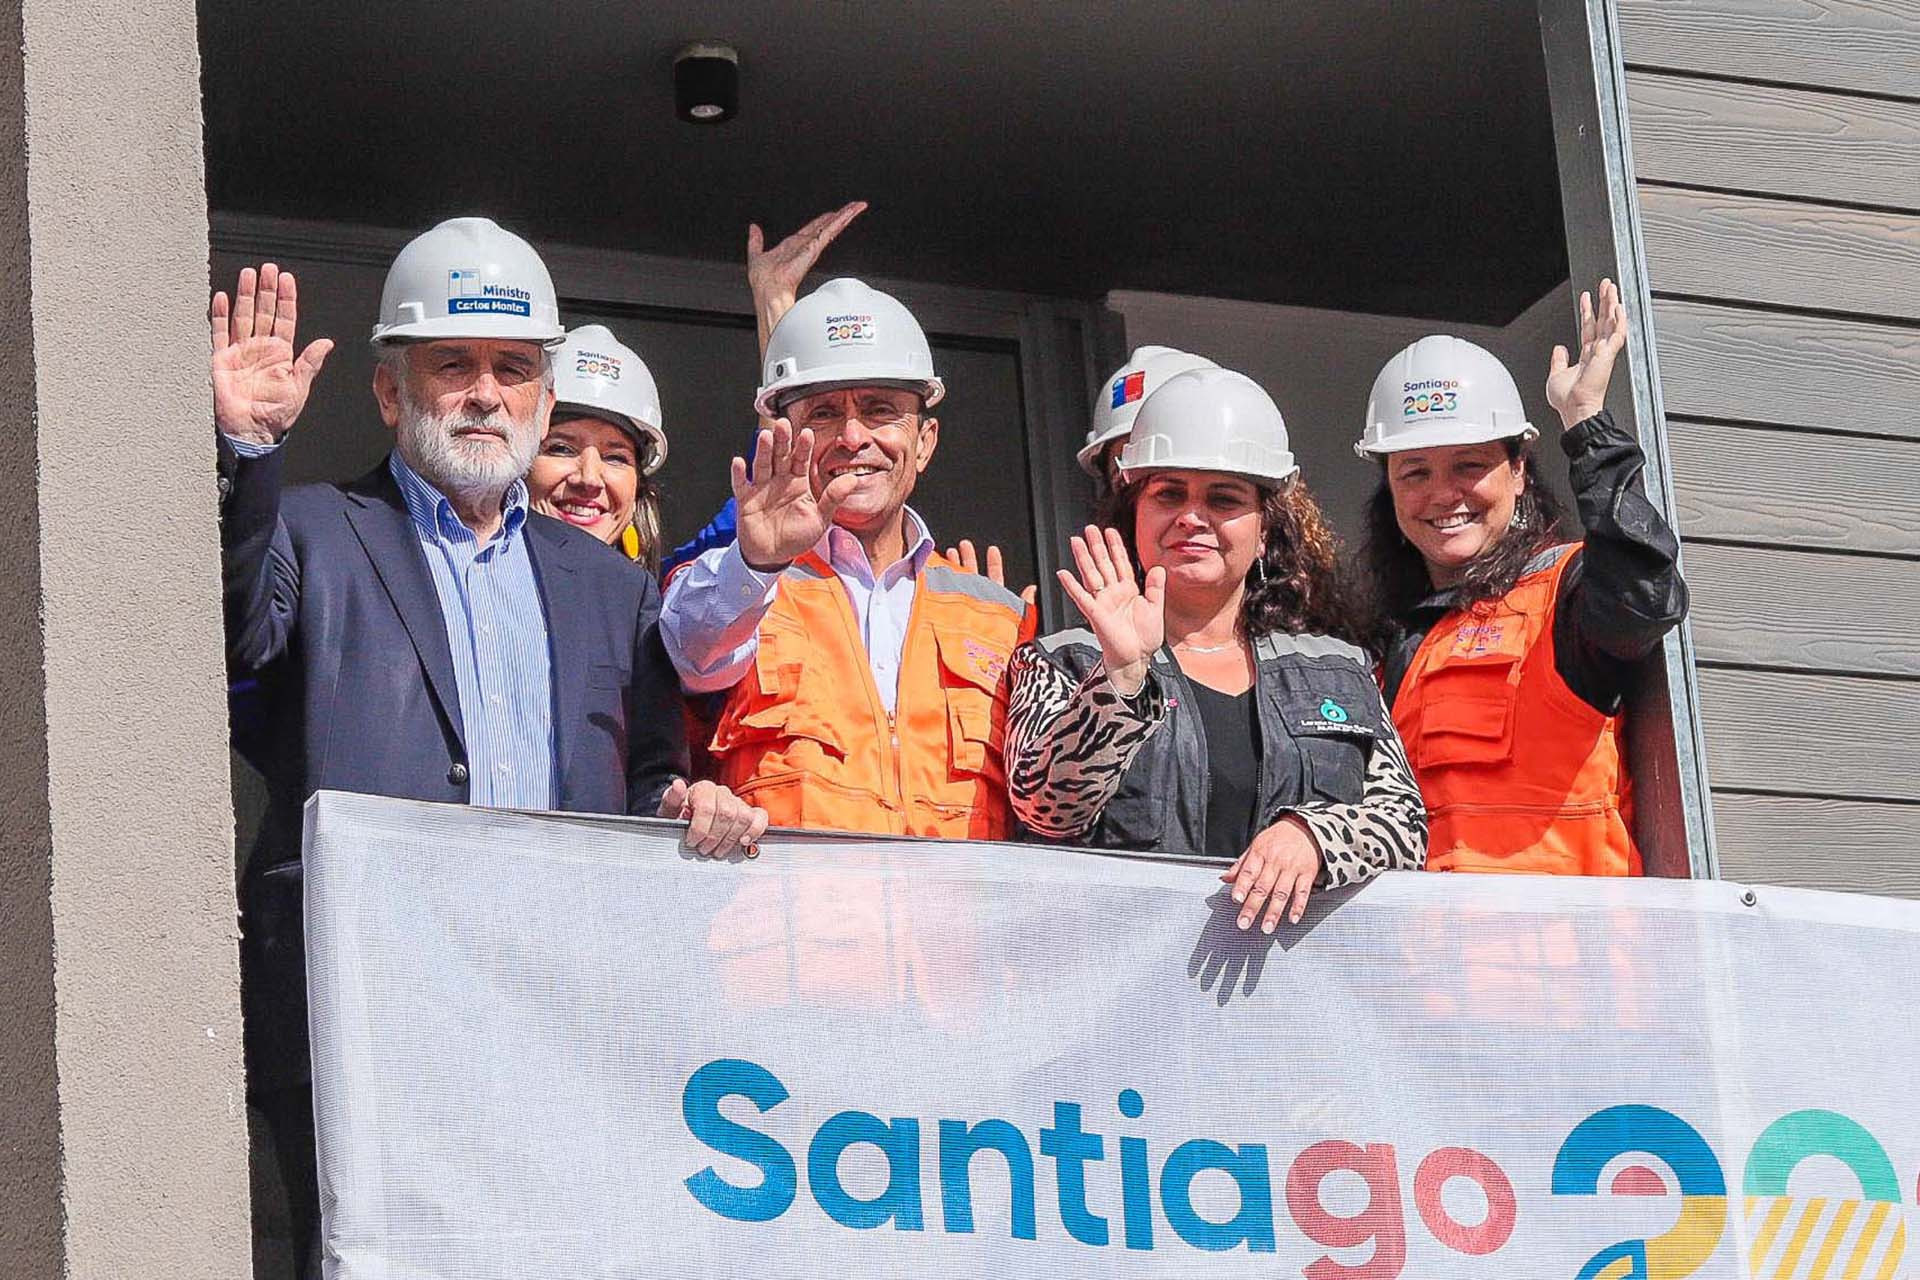 The Santiago 2023 Athletes' Village is said to be more than 80 per cent complete ©Santiago 2023